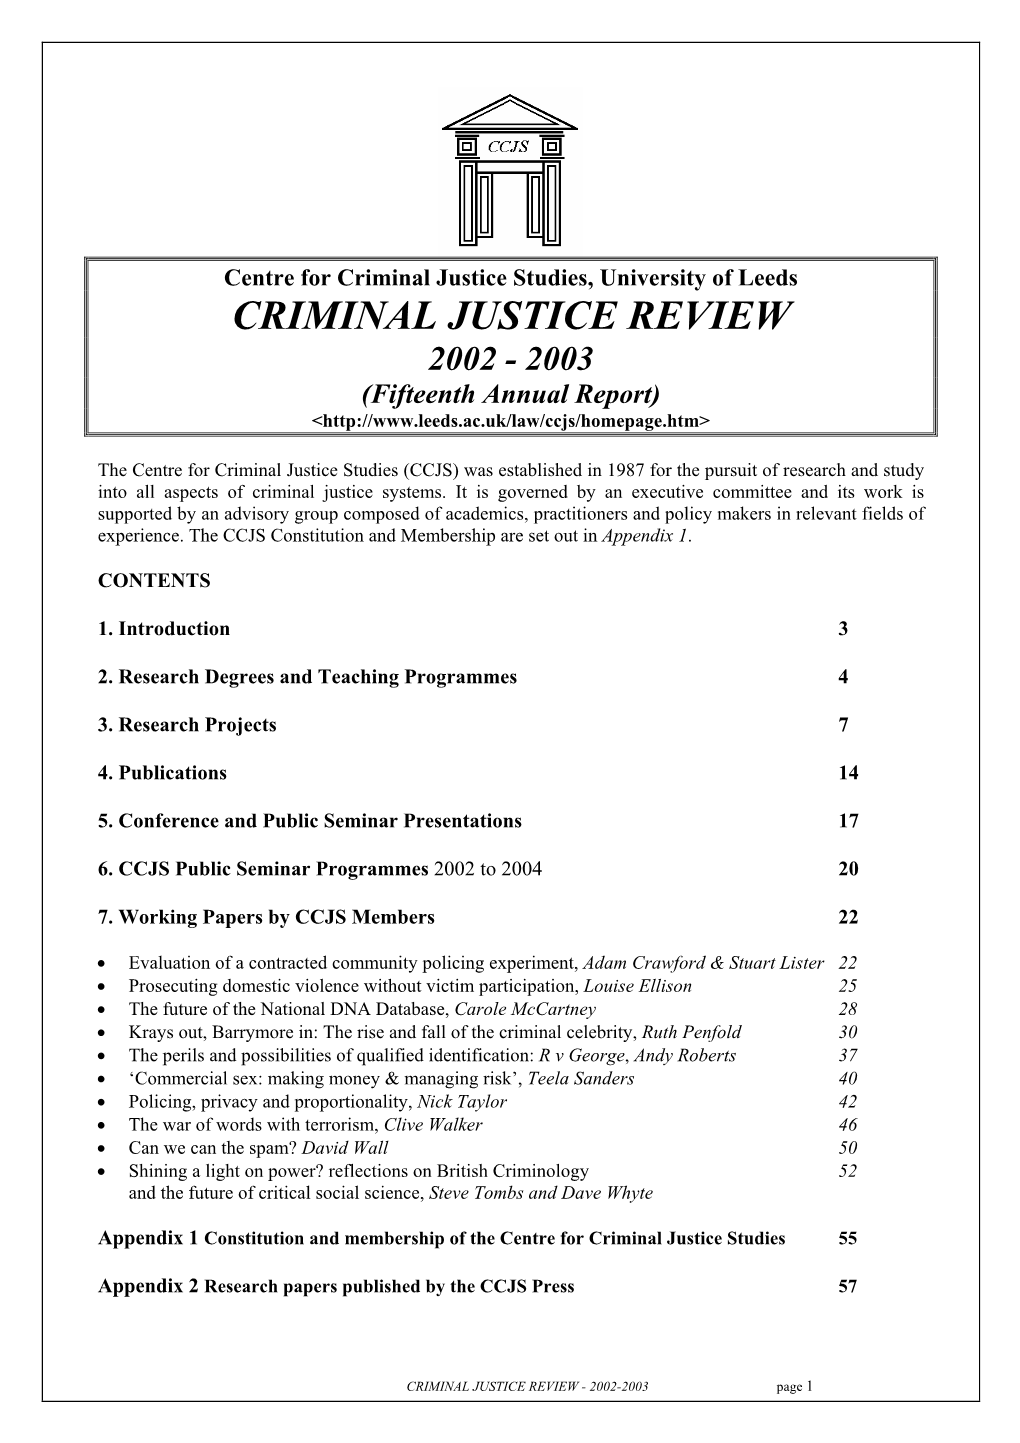 CCJS Annual Report